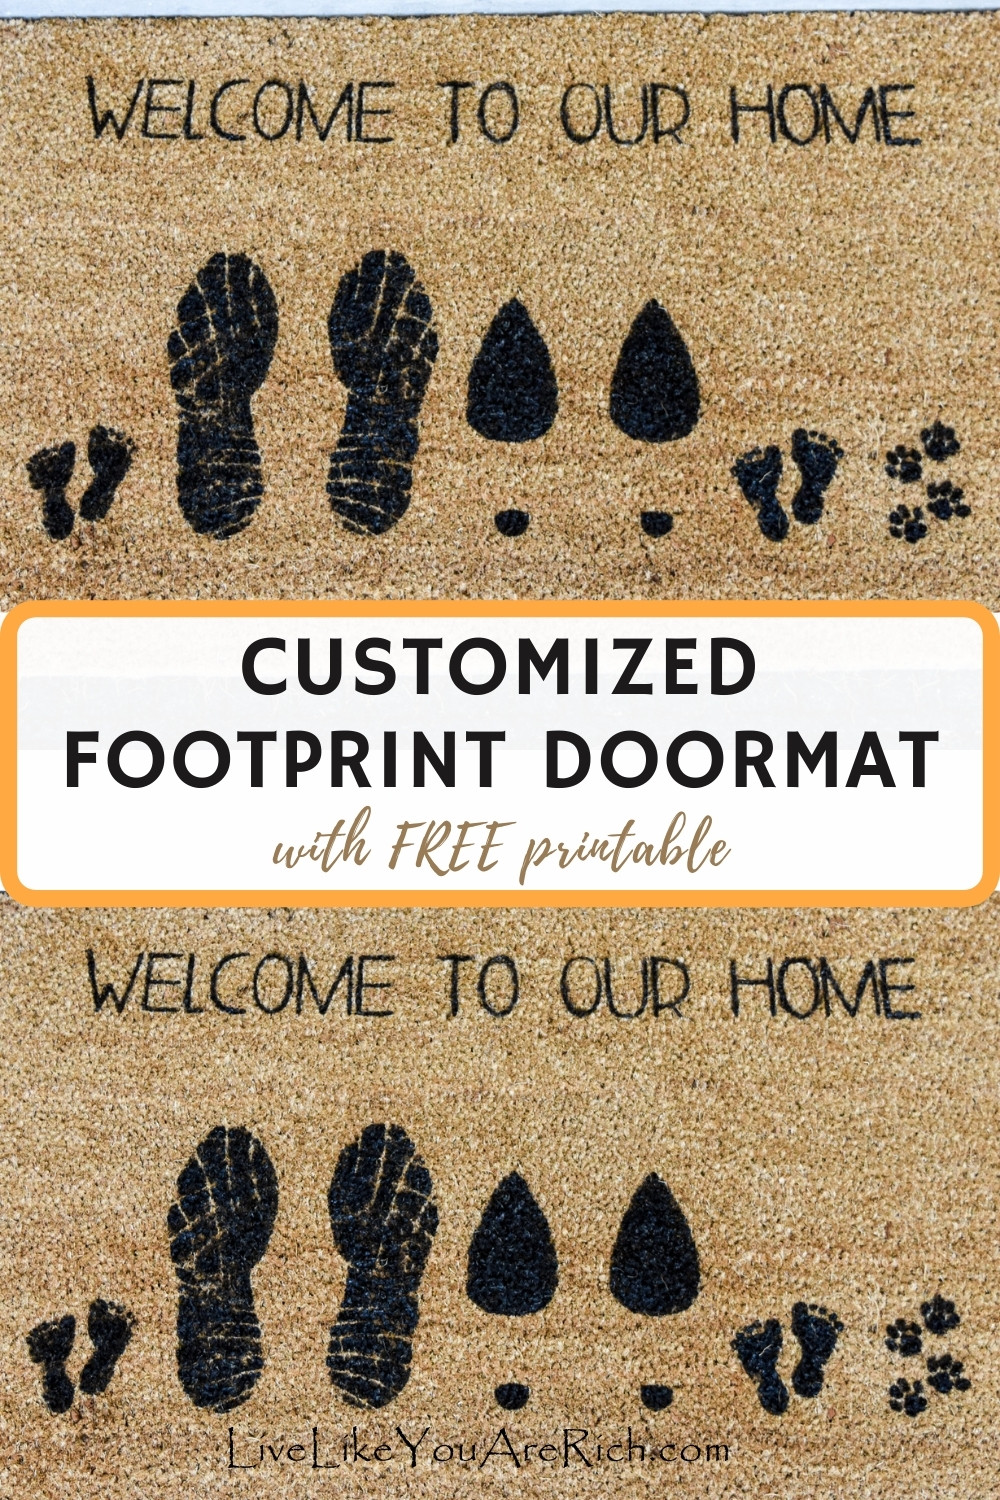 Customized Footprint Doormat with FREE Printable